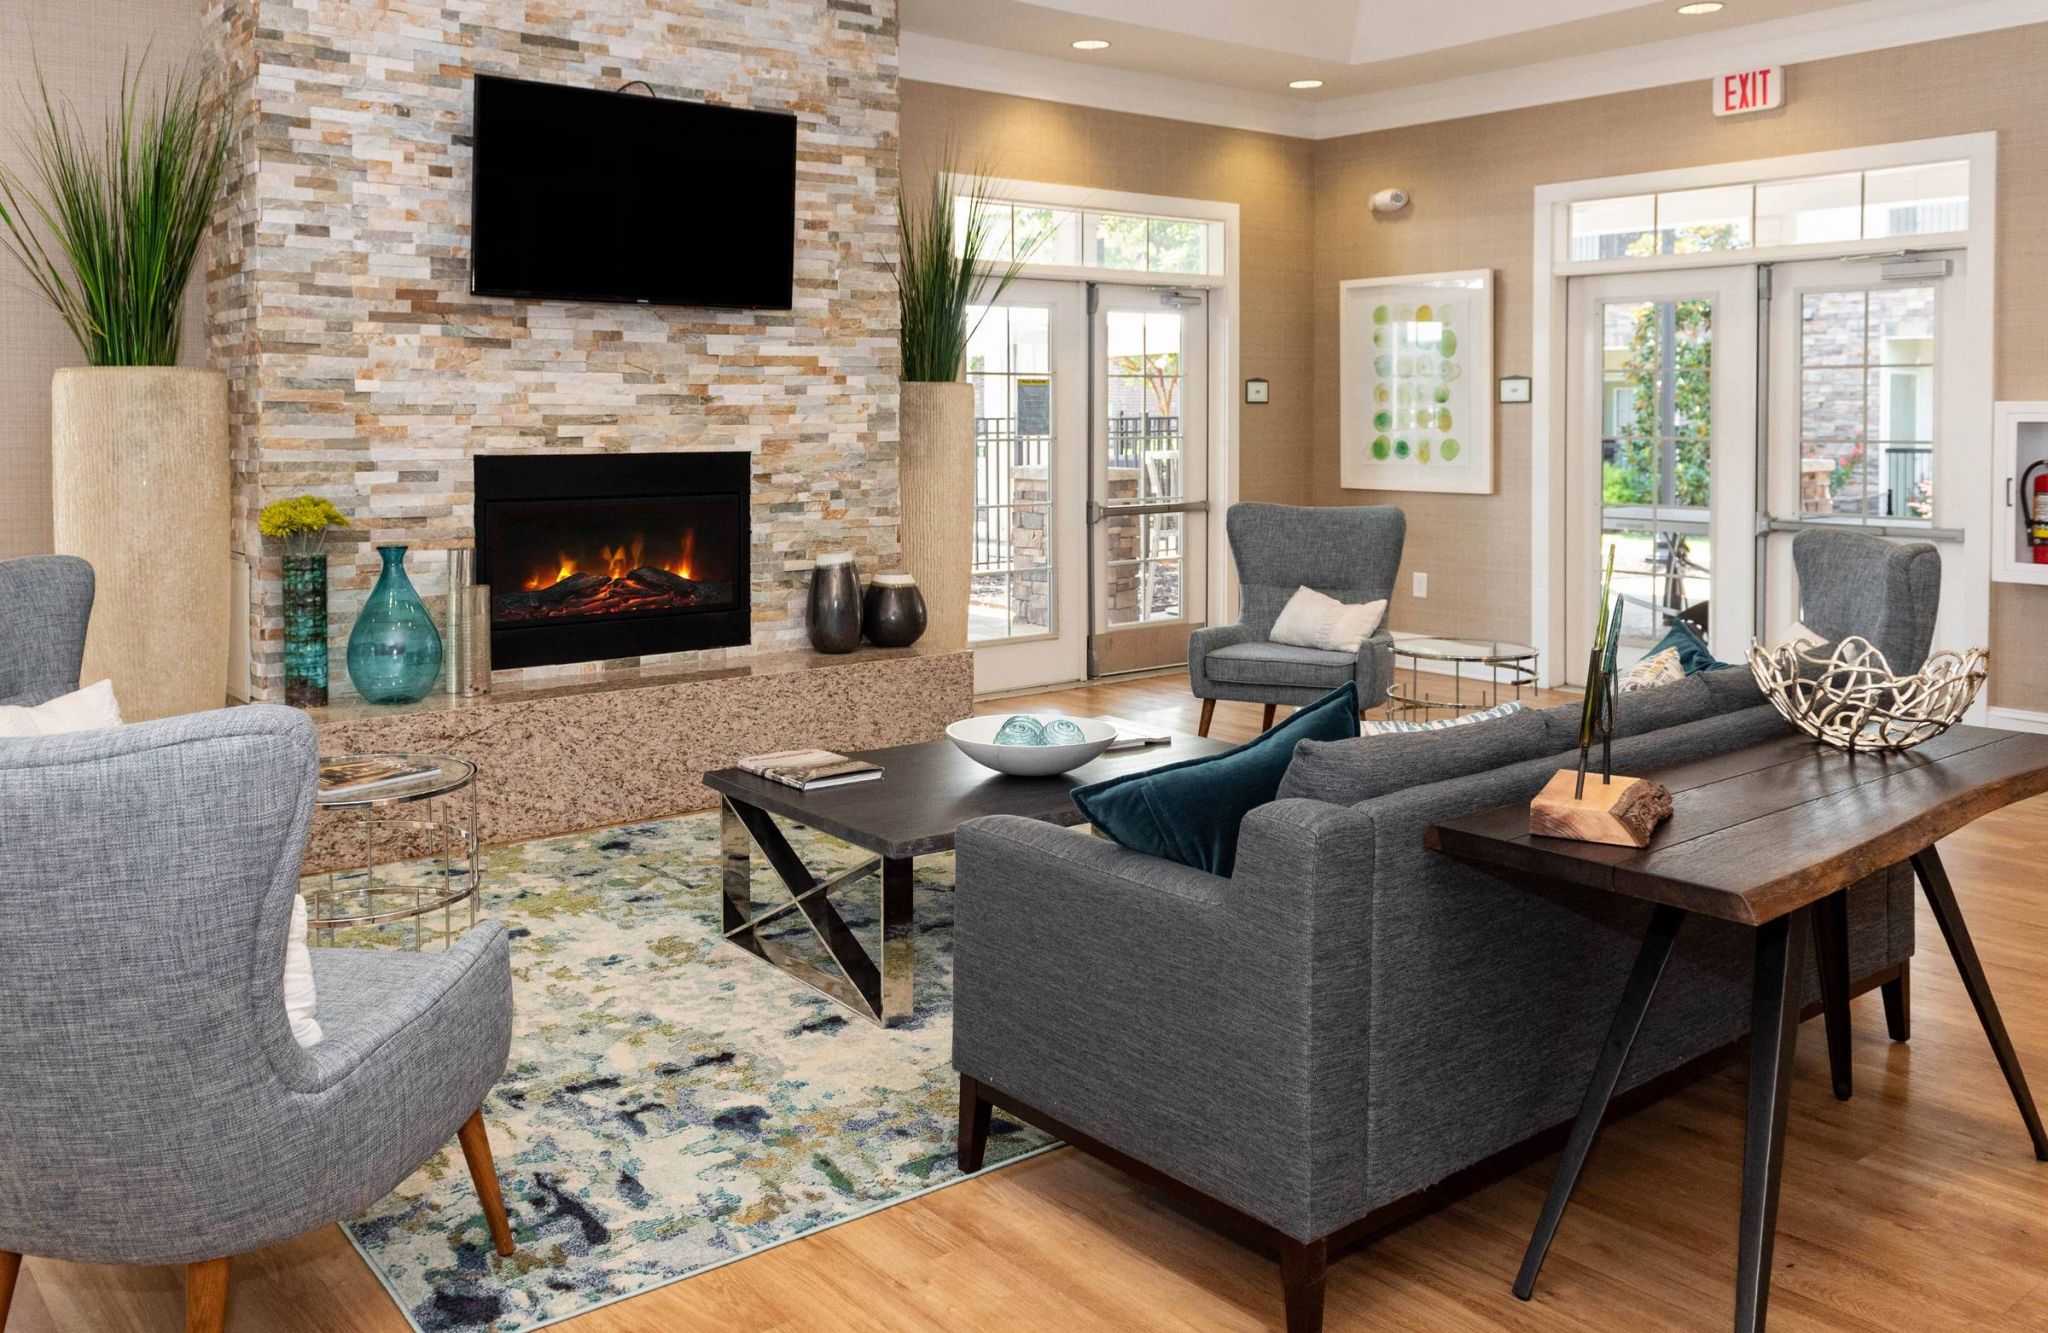 Hawthorne at the Summit resident clubhouse amenity with seating area and beautiful finishes